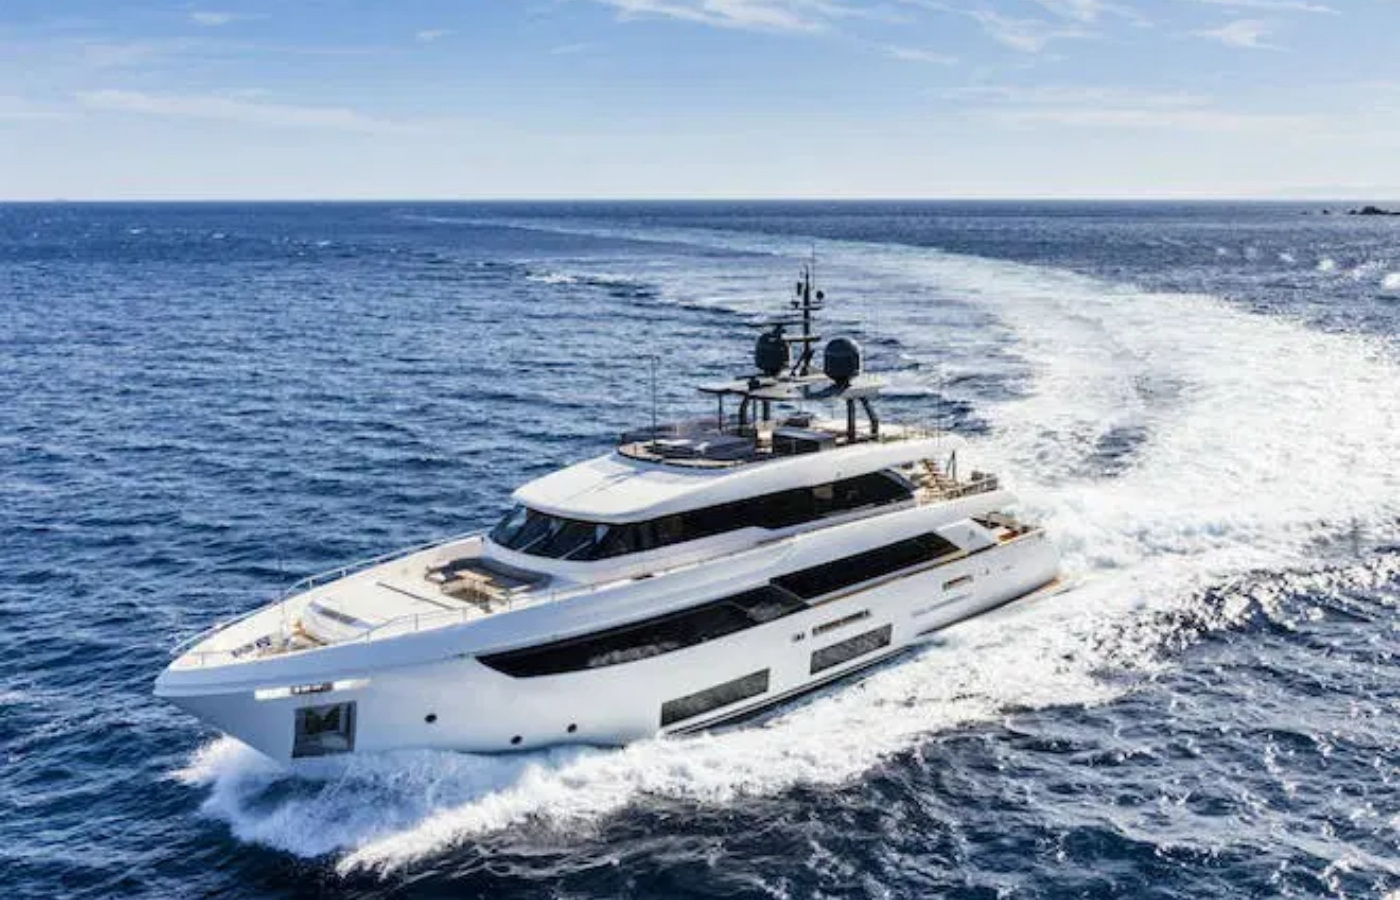 Superyachts Galore at the 2022 Palm Beach International Boat Show [In the News]